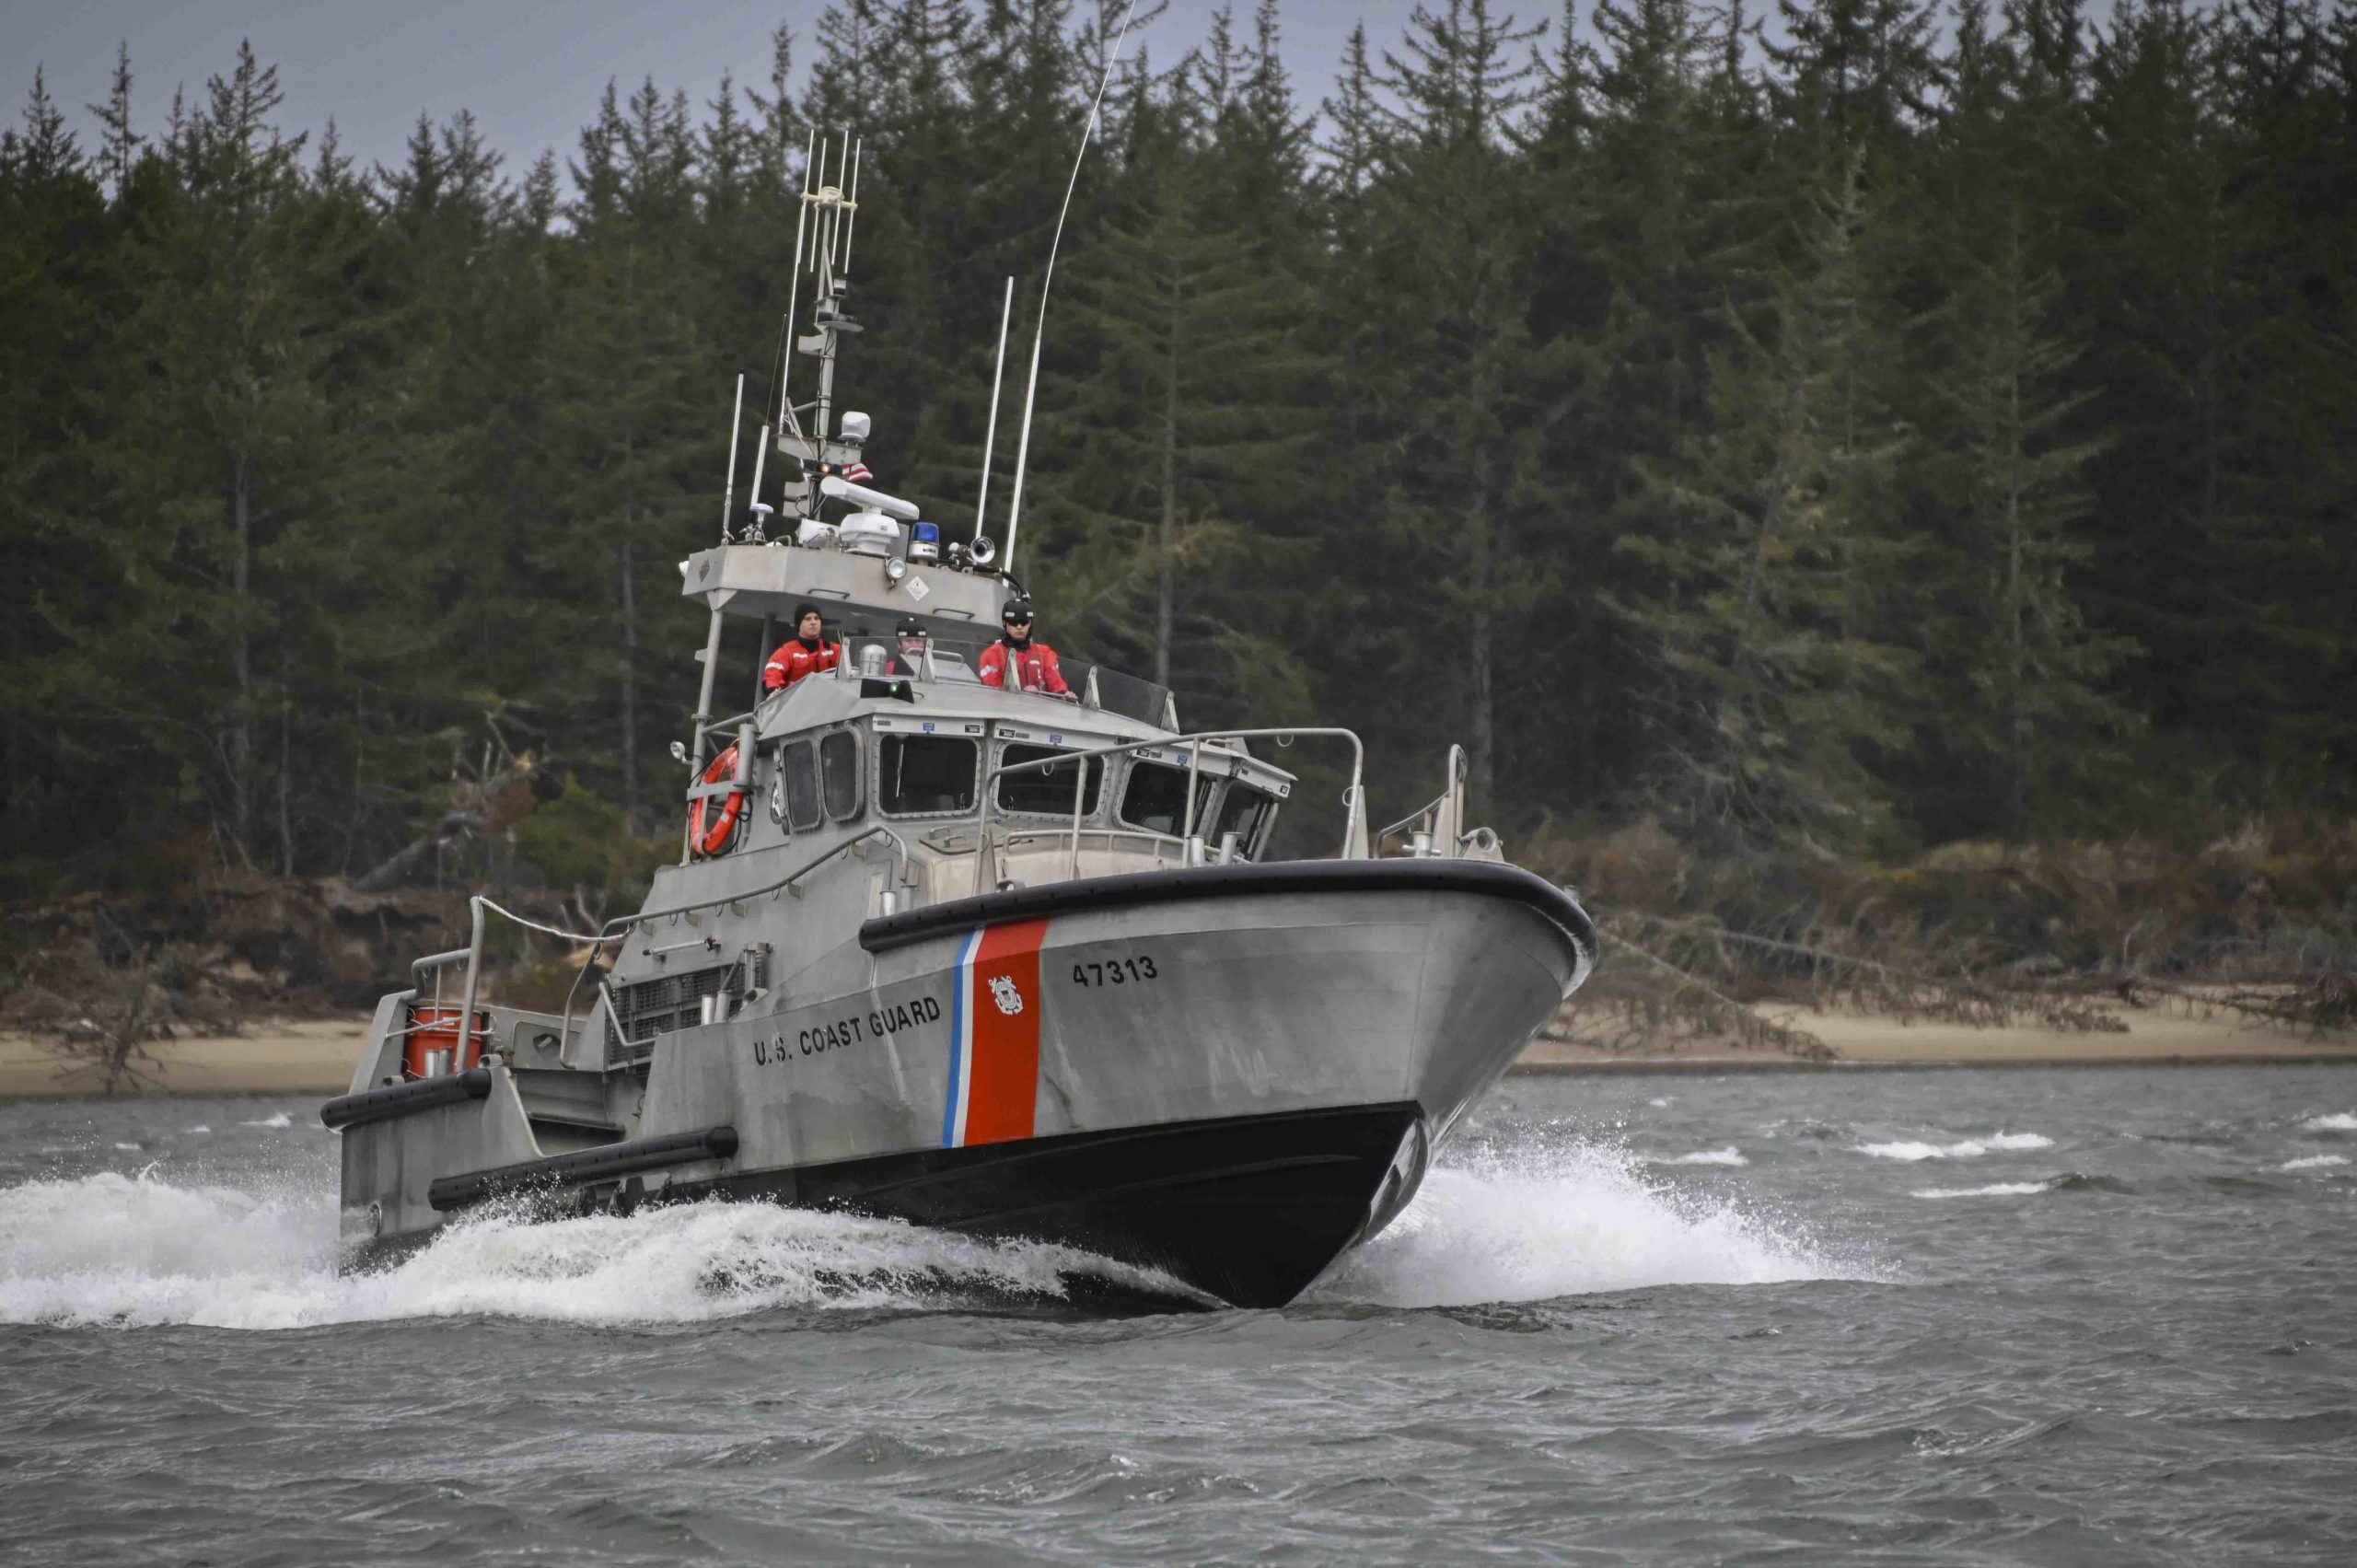 A crew aboard a 47-foot Motor Lifeboat from Coast Guard Station Umpqua River transits near Winchester Bay, Oregon, March 15, 2022. In addition to performing rough water rescues, the station's duties include enforcement of laws and treaties, marine environmental protection, maritime law enforcement, boating safety and implementation of commercial fishing vessel safety regulations. (U.S. Coast Guard photo by Petty Officer Steve Strohmaier)